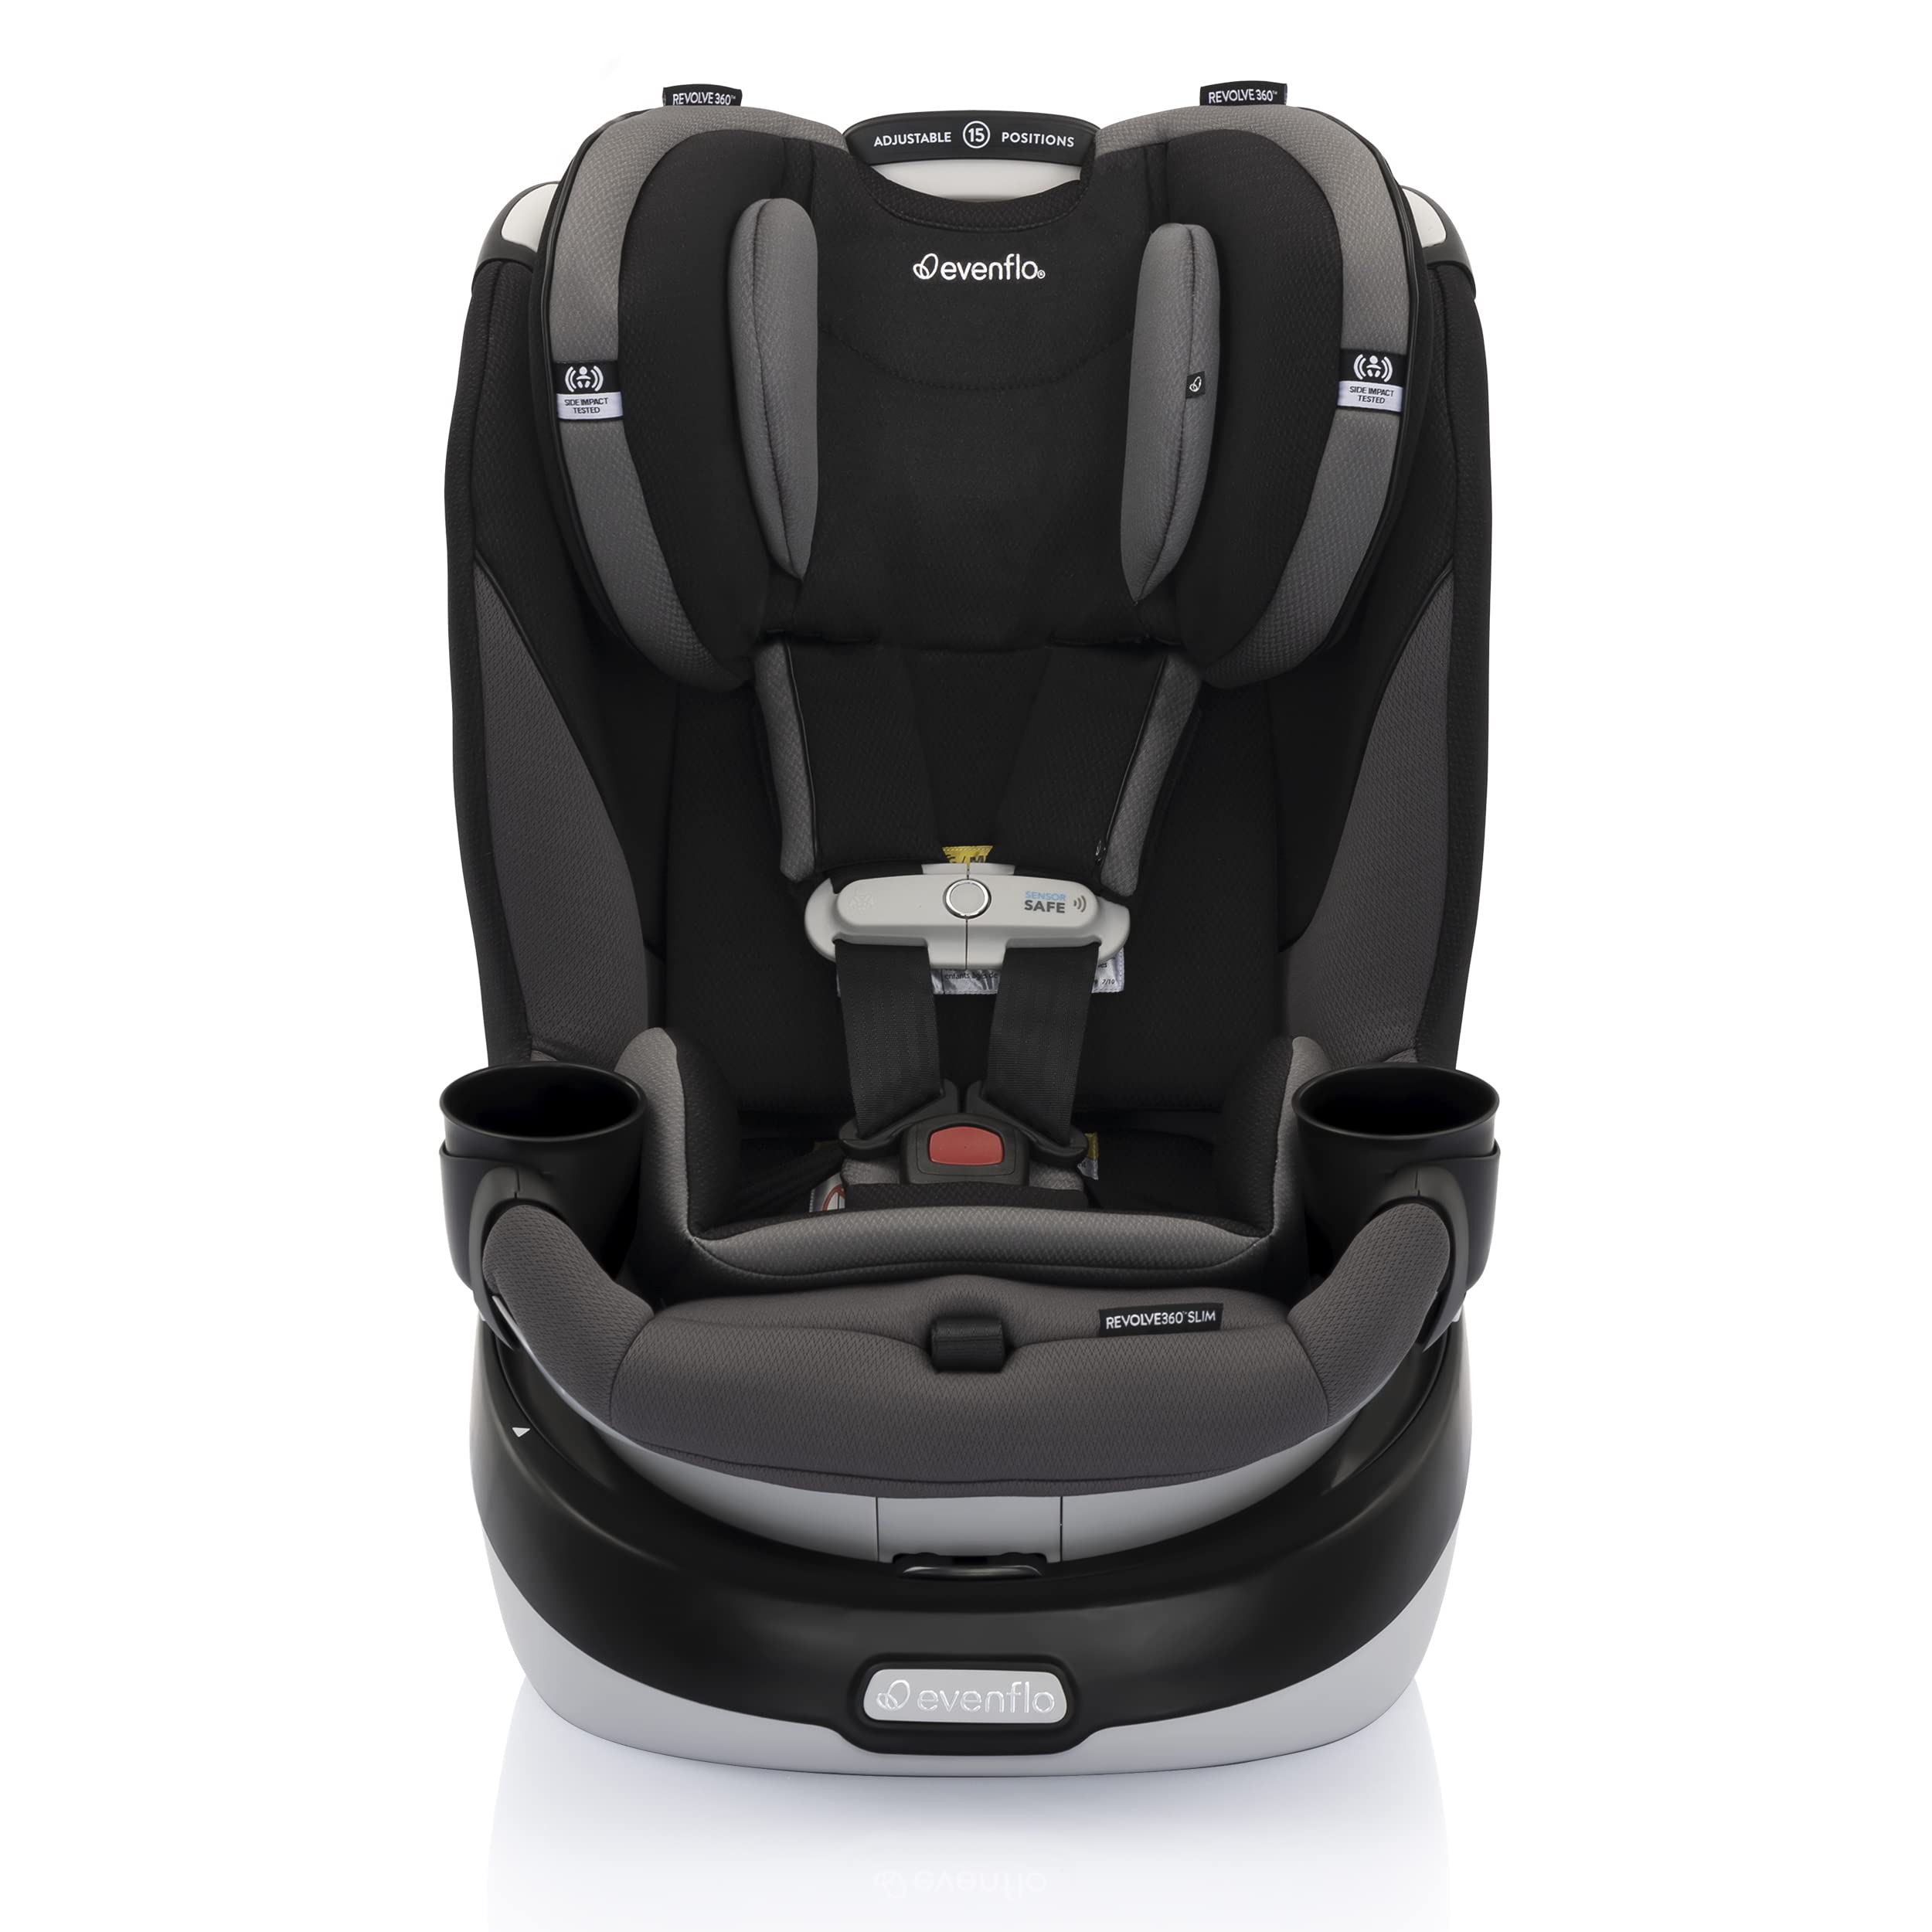 Evenflo Gold Revolve360 Slim 2-in-1 Rotational Car Seat w/ SensorSafe (3 Colors) $265.99 + Free Shipping